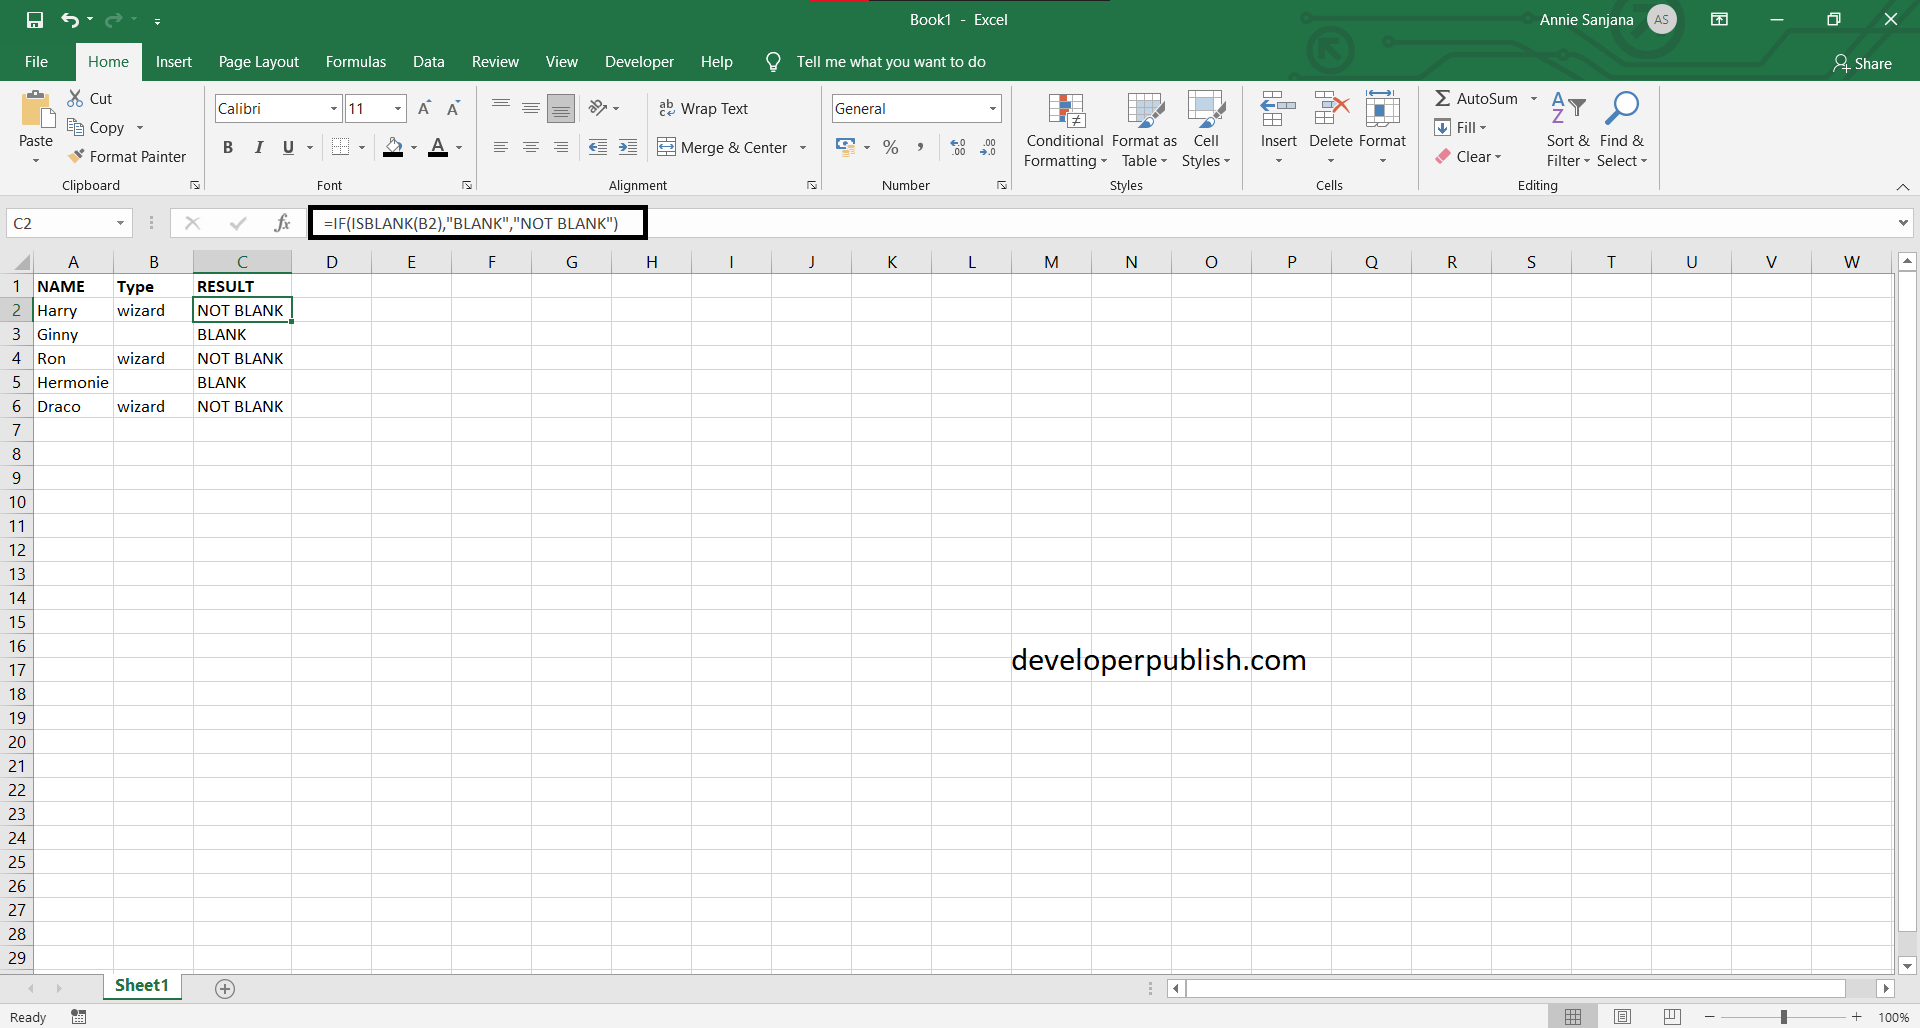 How to Find Blank Cells in Microsoft Excel? - Developer Publish